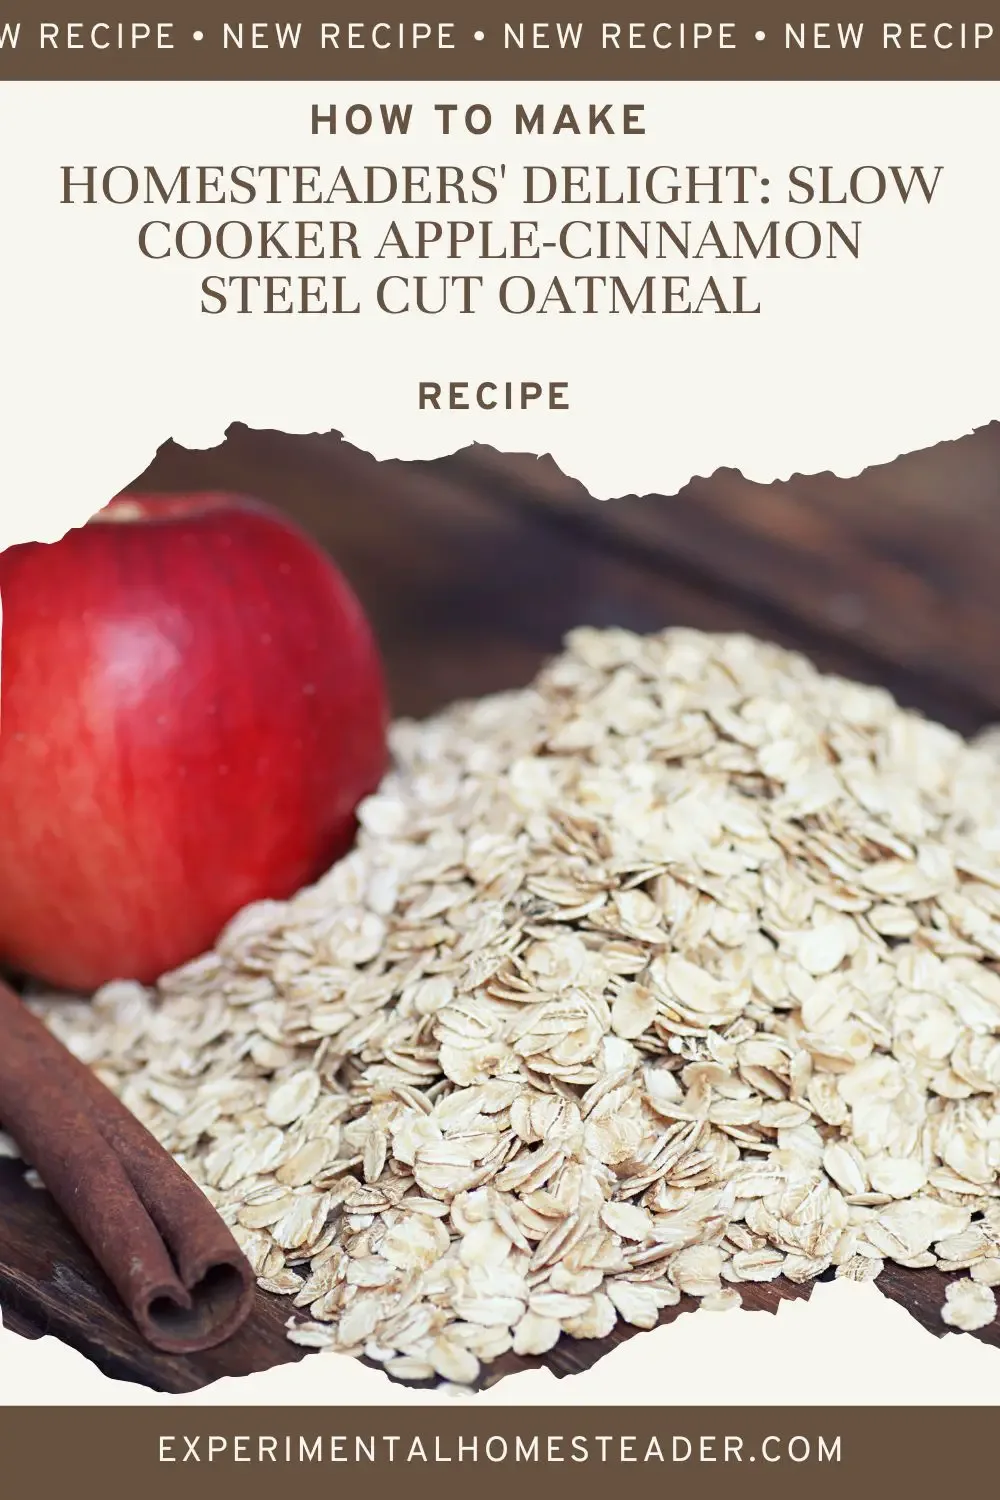 Apples, cinnamon sticks and uncooked oats on a table top.